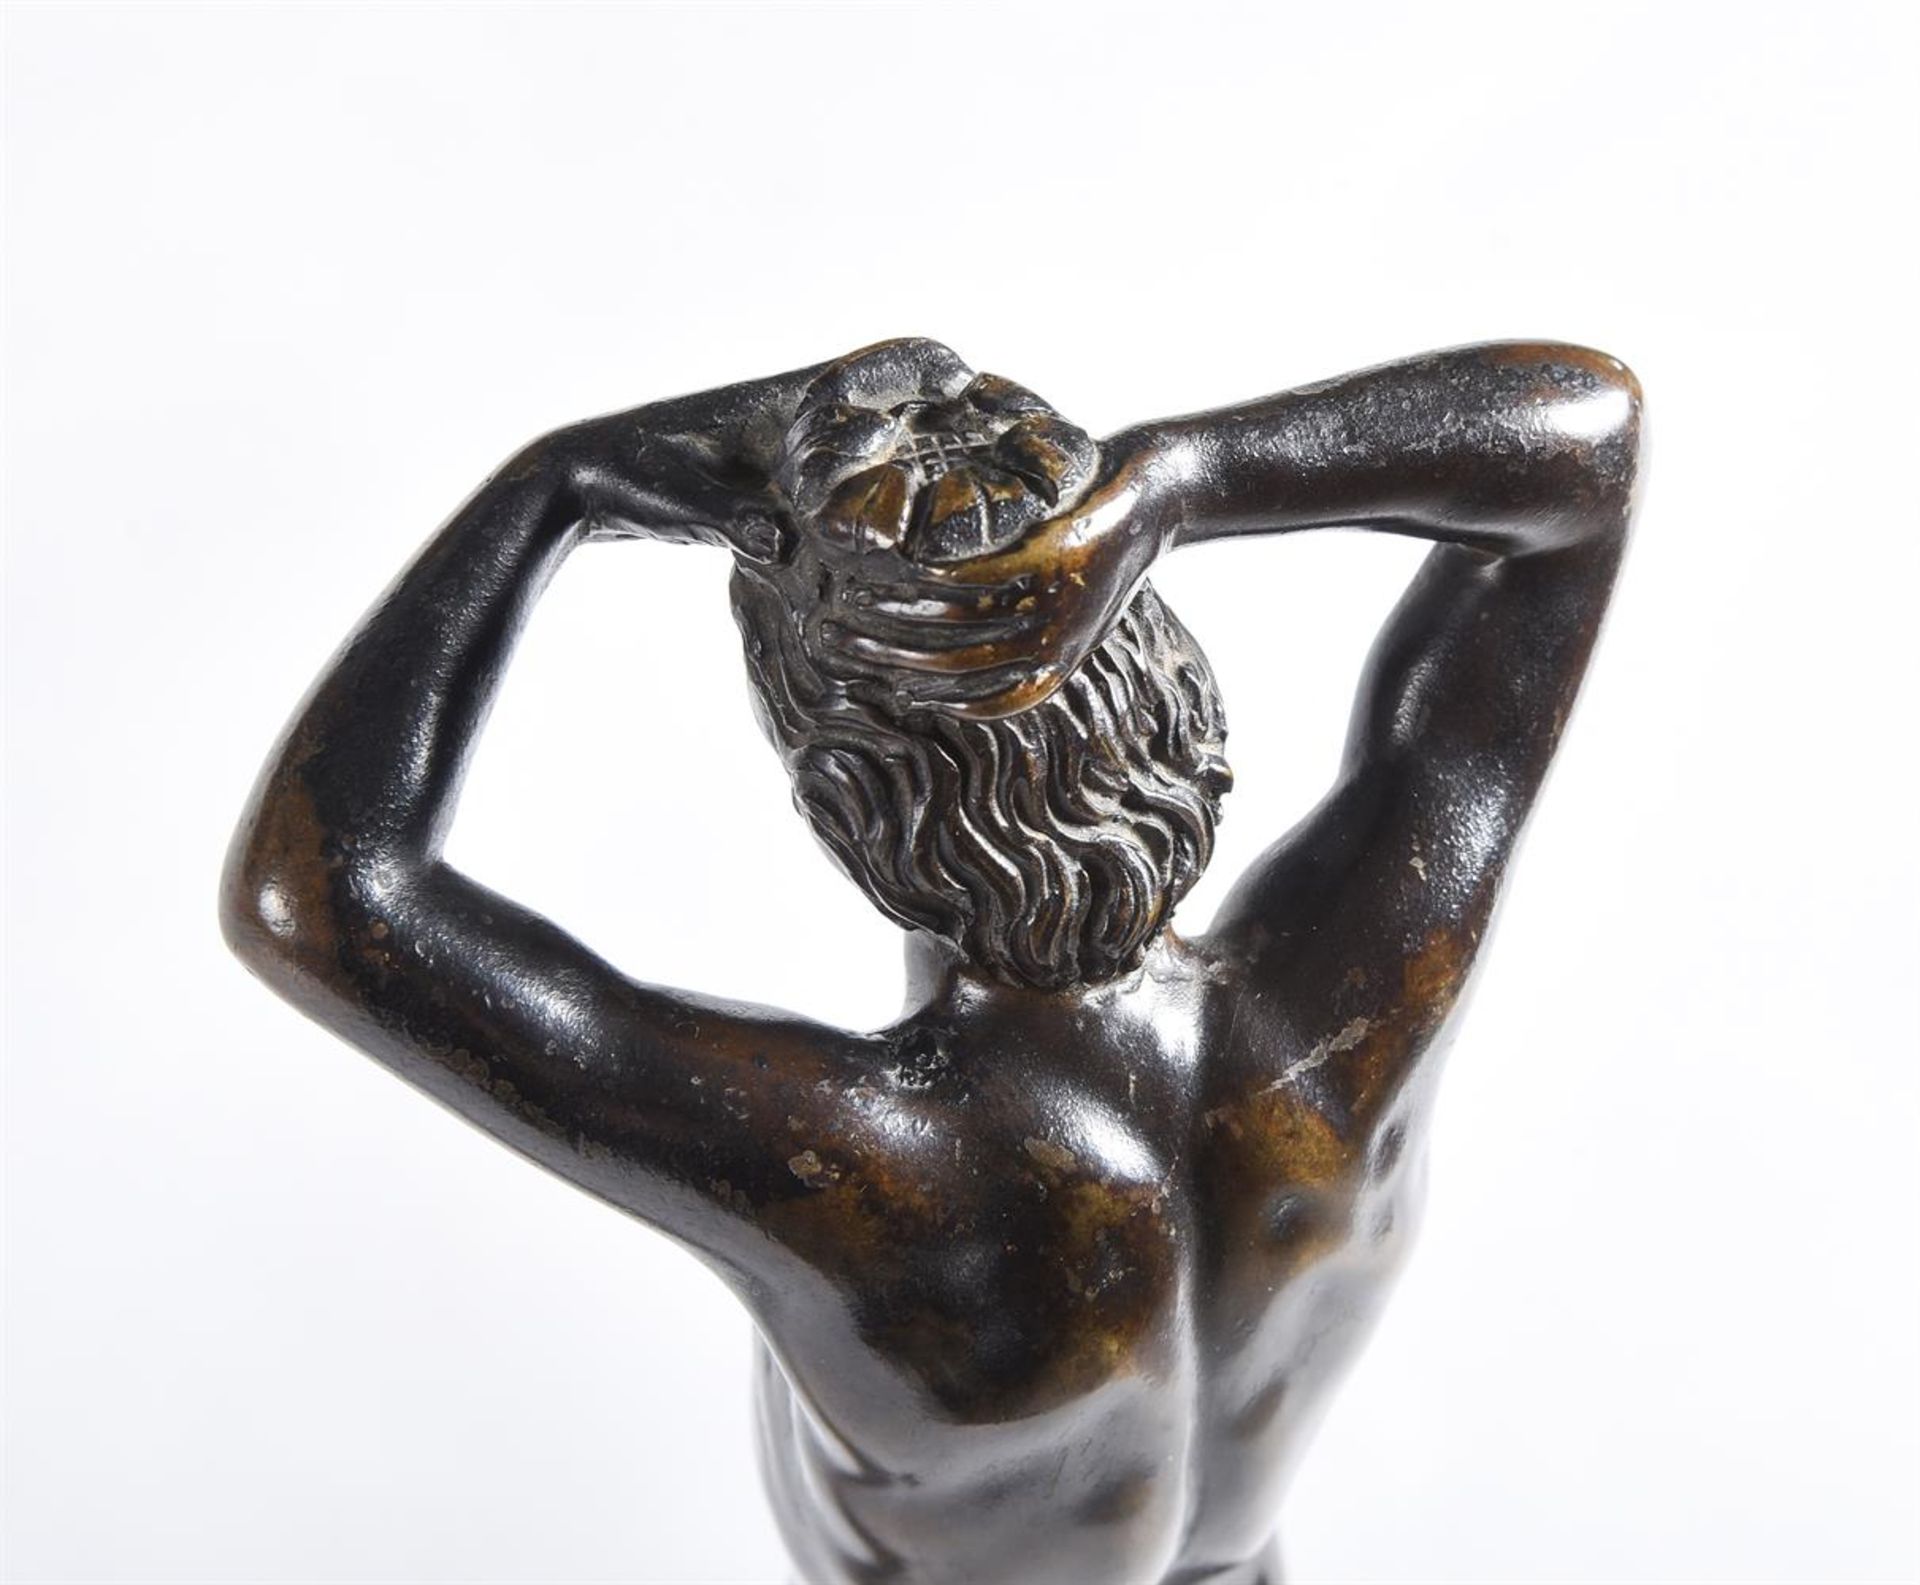 AFTER BARTHELEMY PRIEUR (FRENCH, 1536-1611), A BRONZE FIGURE OF A YOUTH OR NARCISSUS - Image 3 of 4